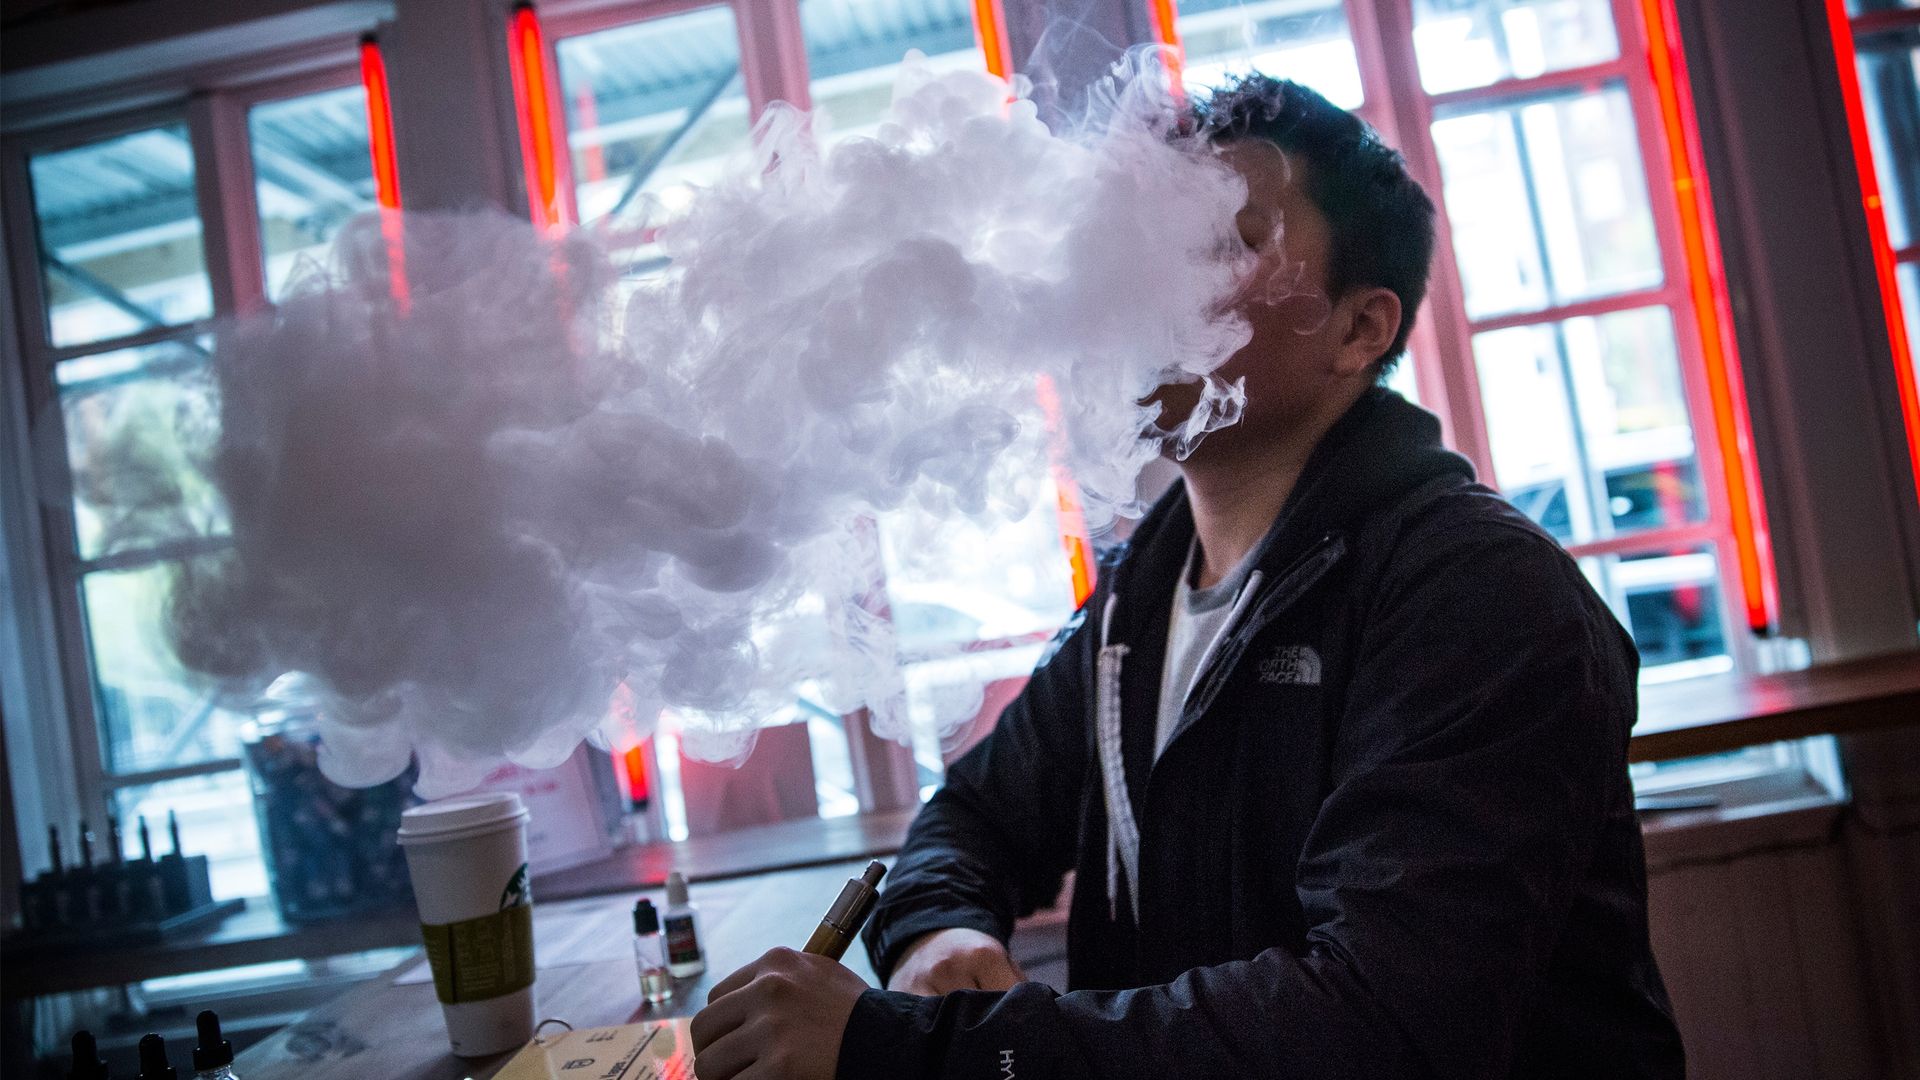 Man vaping in a coffee shop